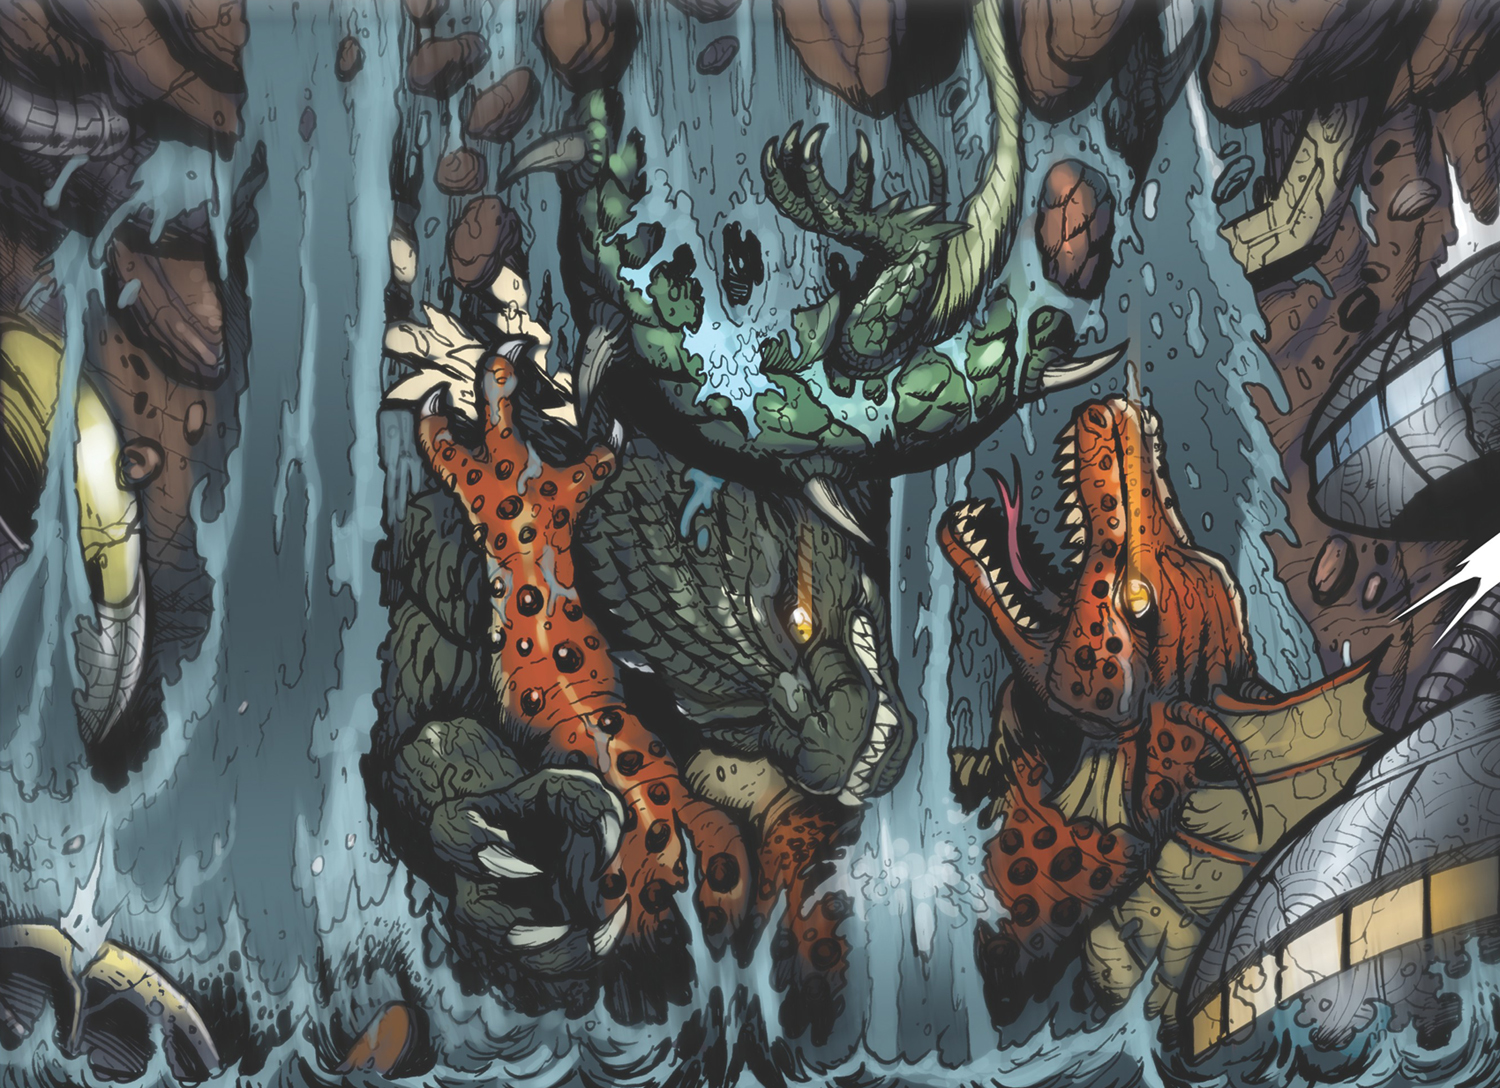 Godzilla: Rulers of Earth #2 Preview, Merchandise